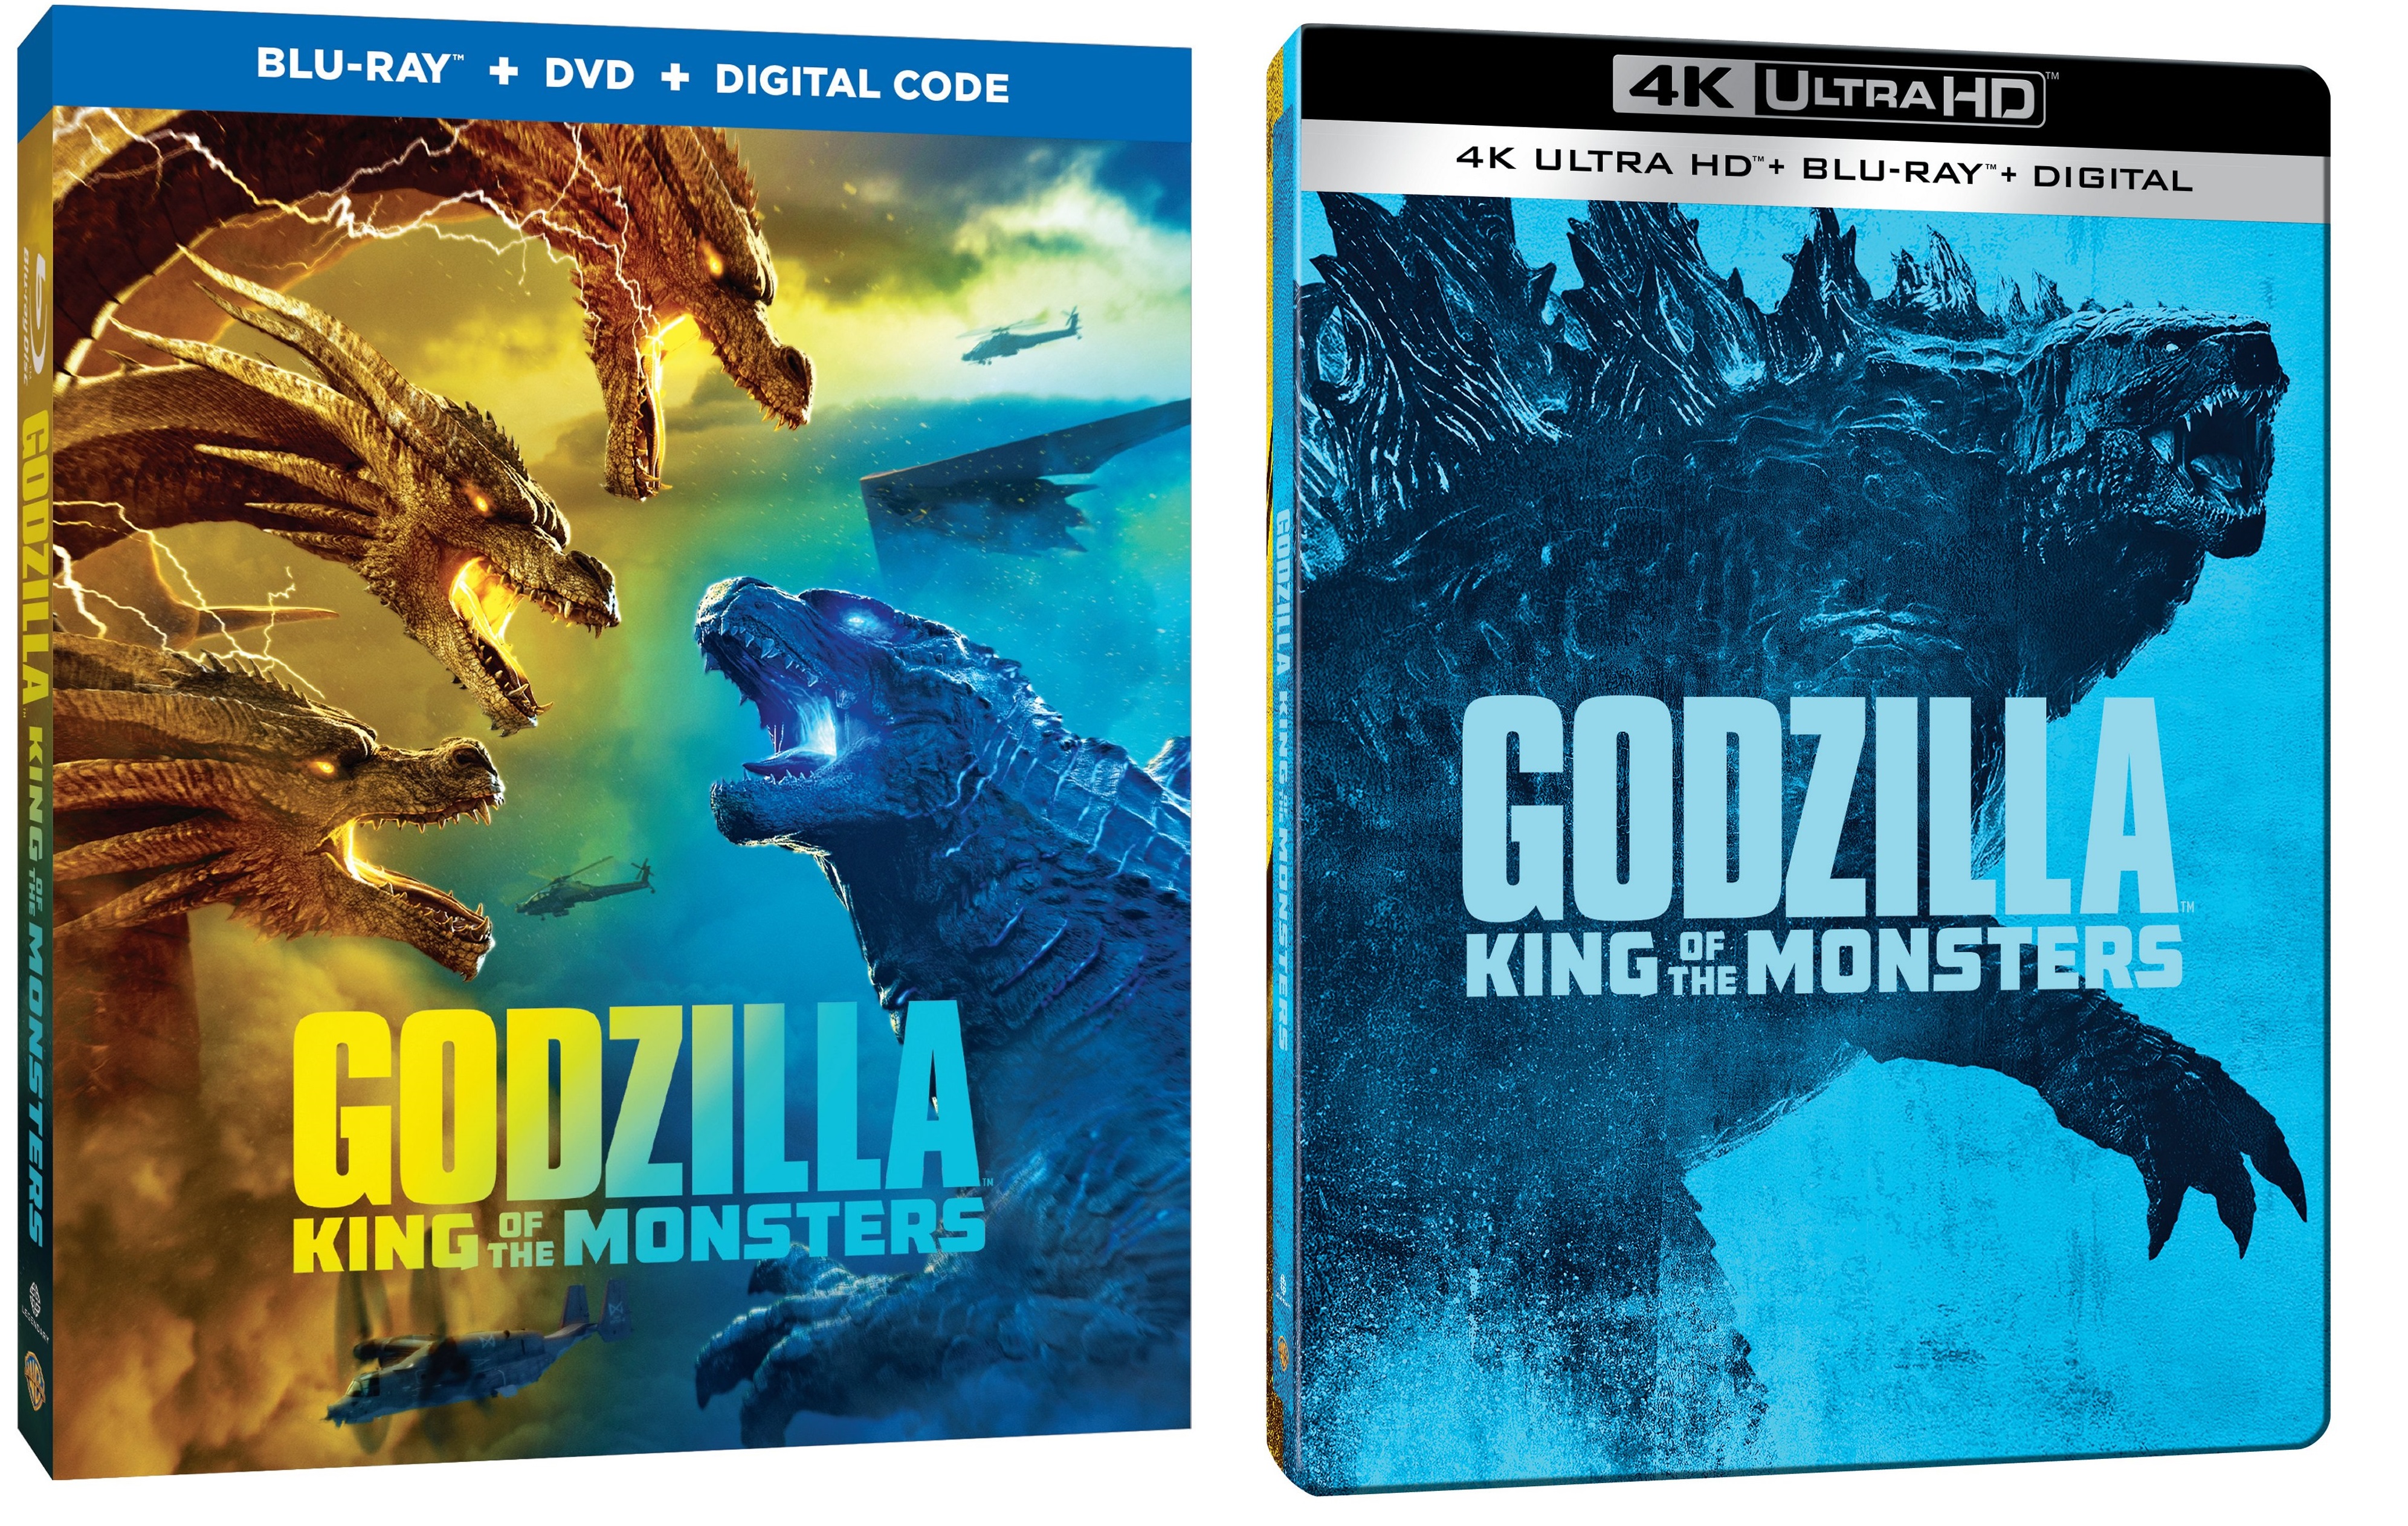 'Godzilla: King Of The Monsters'; Arrives On Digital August 13 & On 4K Ultra HD, Blu-ray & DVD August 27, 2019 From Warner Bros 4